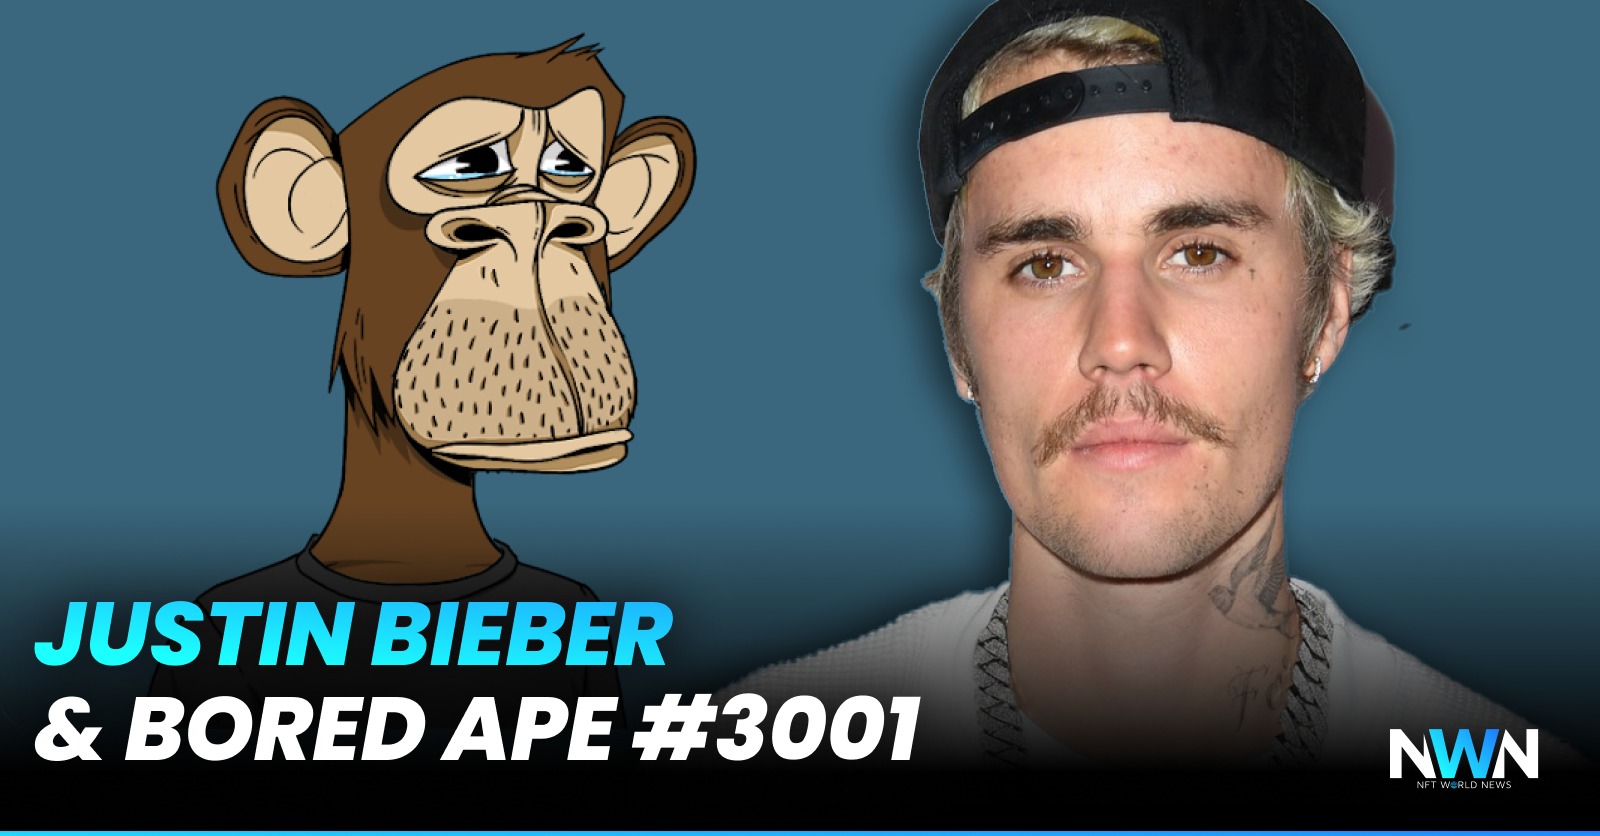 Justin Bieber Paid Too Much For Bored Ape #3001